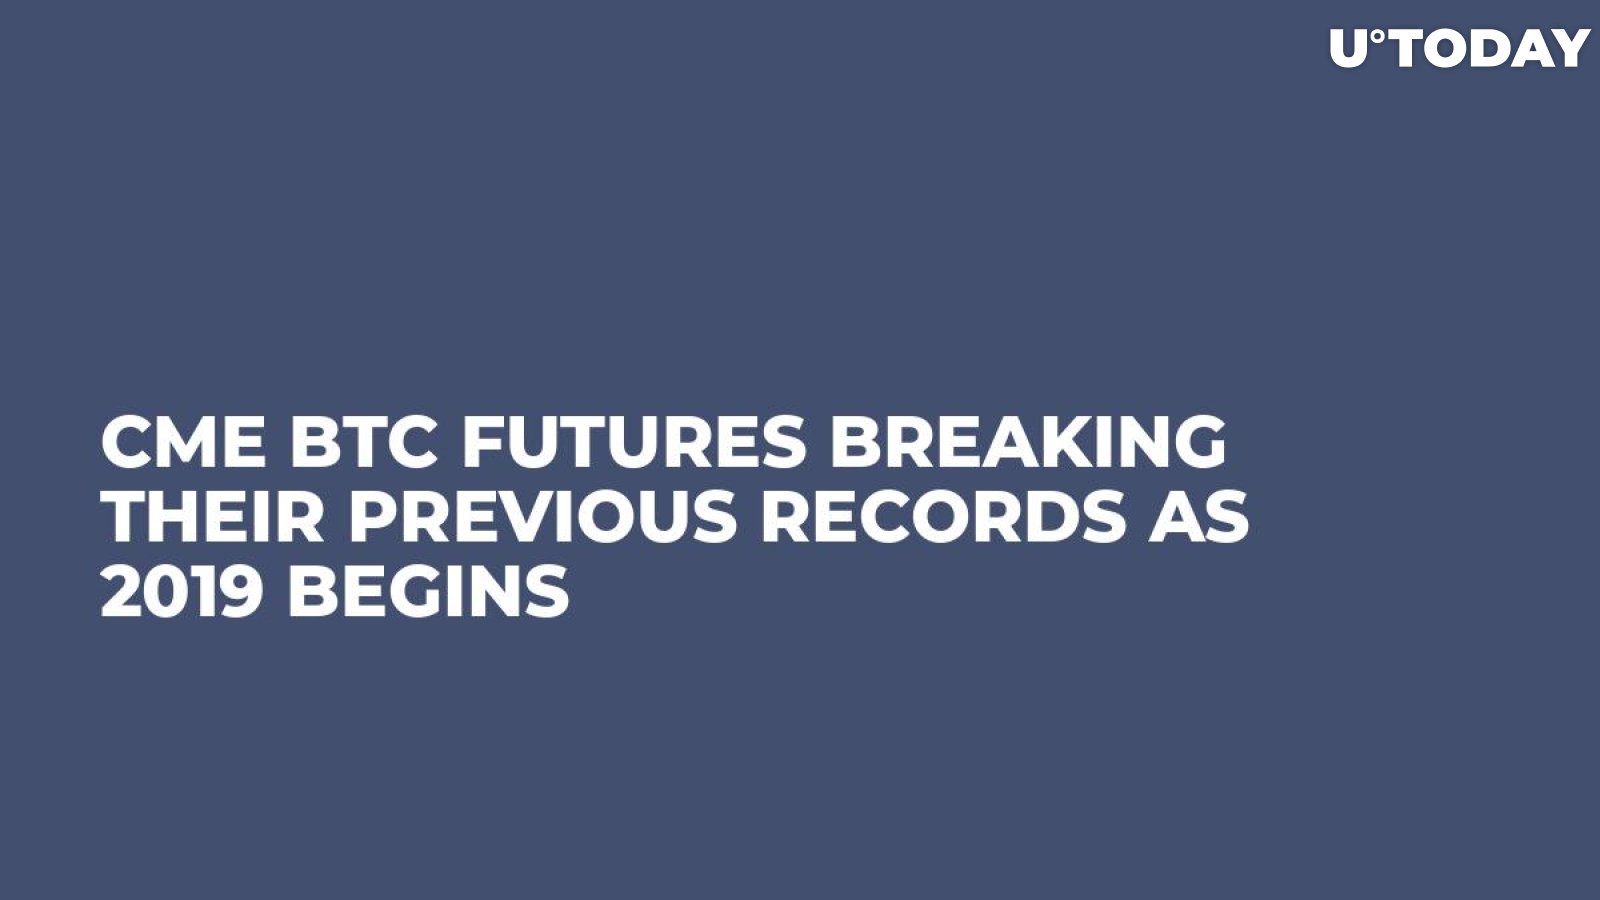 CME BTC Futures Breaking Their Previous Records as 2019 Begins